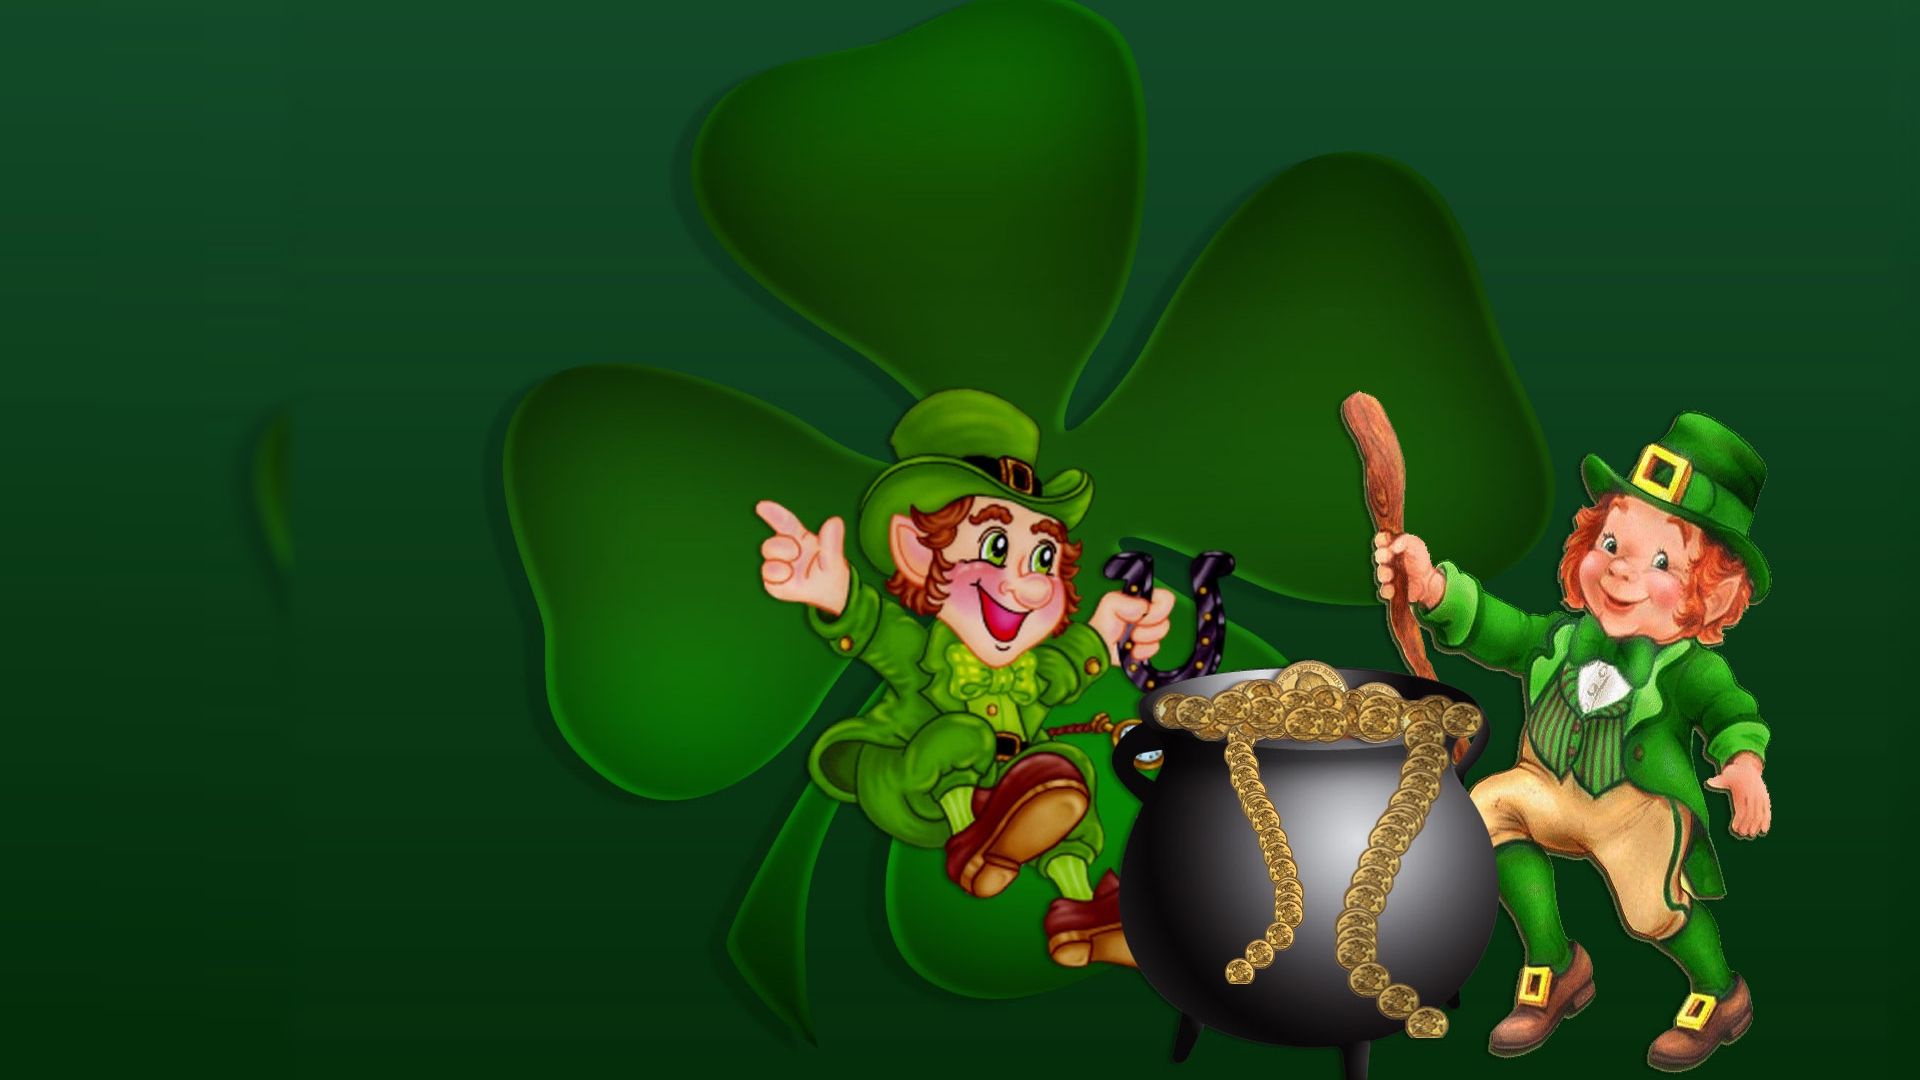 st patrick day hd desktop background hd wallpapers Car Pictures 1920x1080